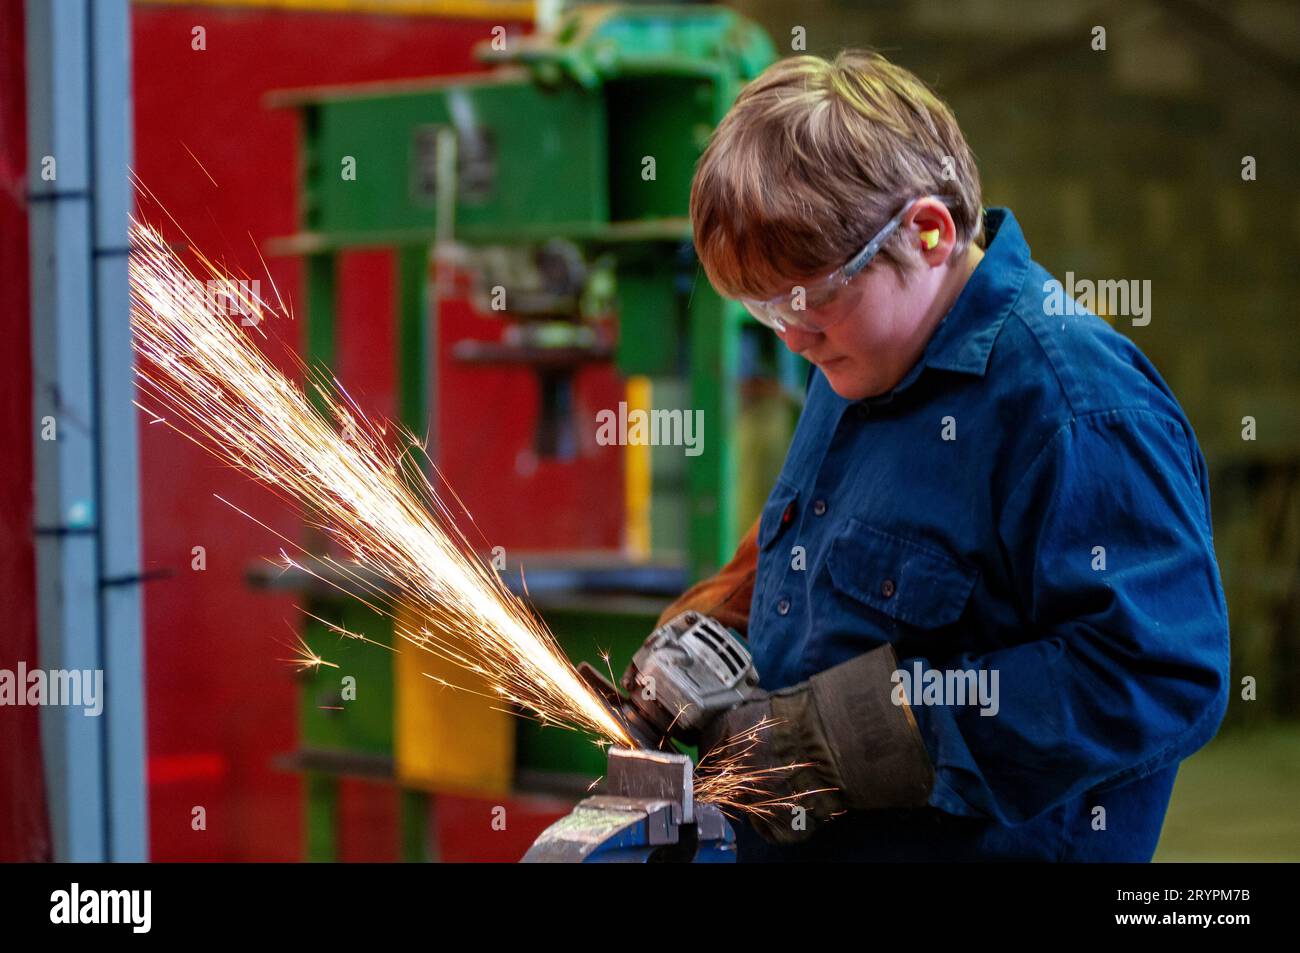 Young high-school boy wearing protective eyewear learning to use an angle grinder in a trade course to teach technical skills Stock Photo